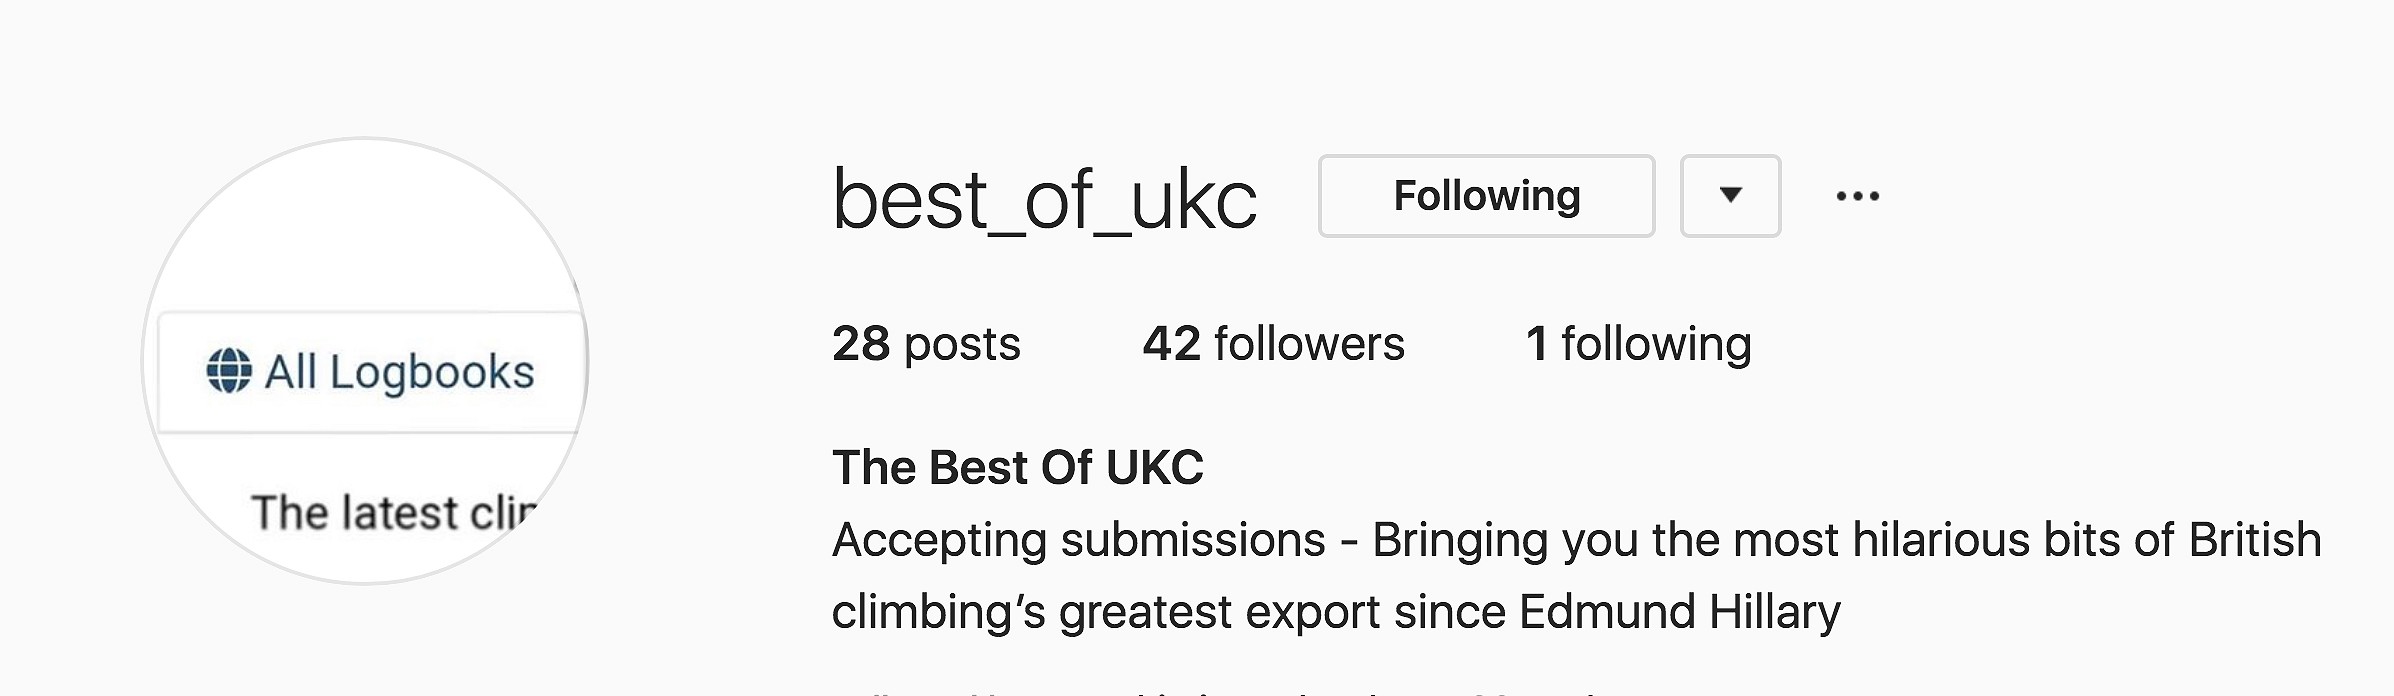 The Best of UKC  © UKC Articles